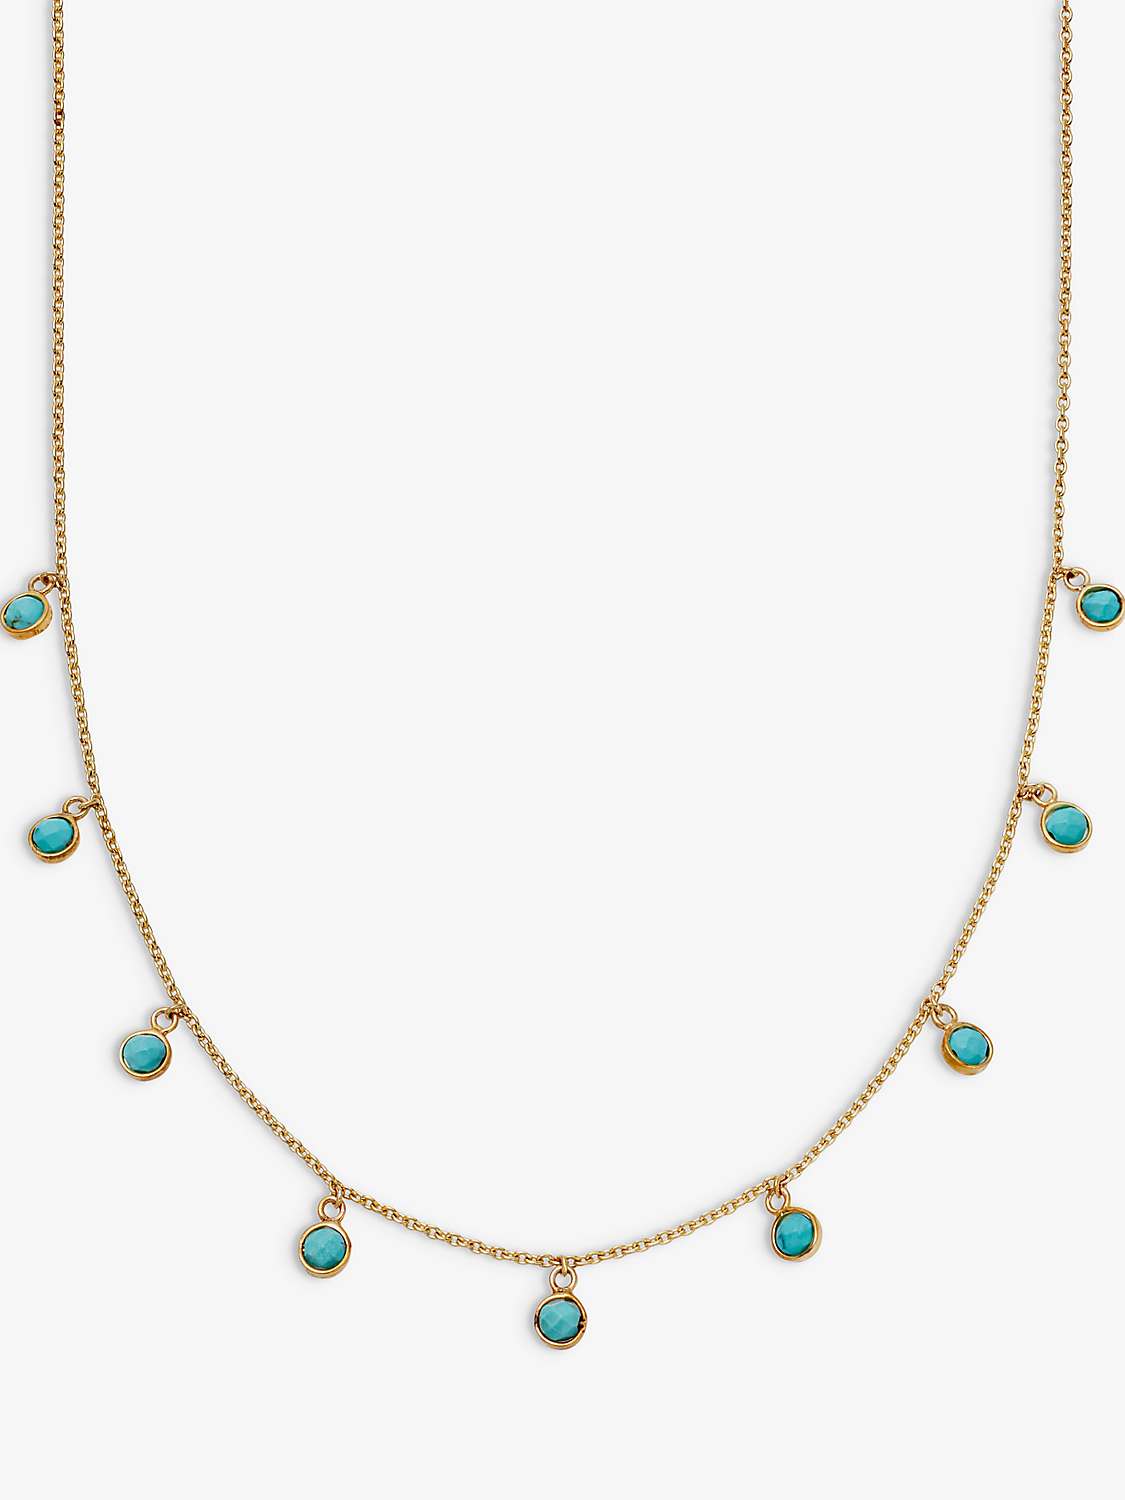 Buy Daisy London Turquoise Charm Chain Necklace, Gold Online at johnlewis.com